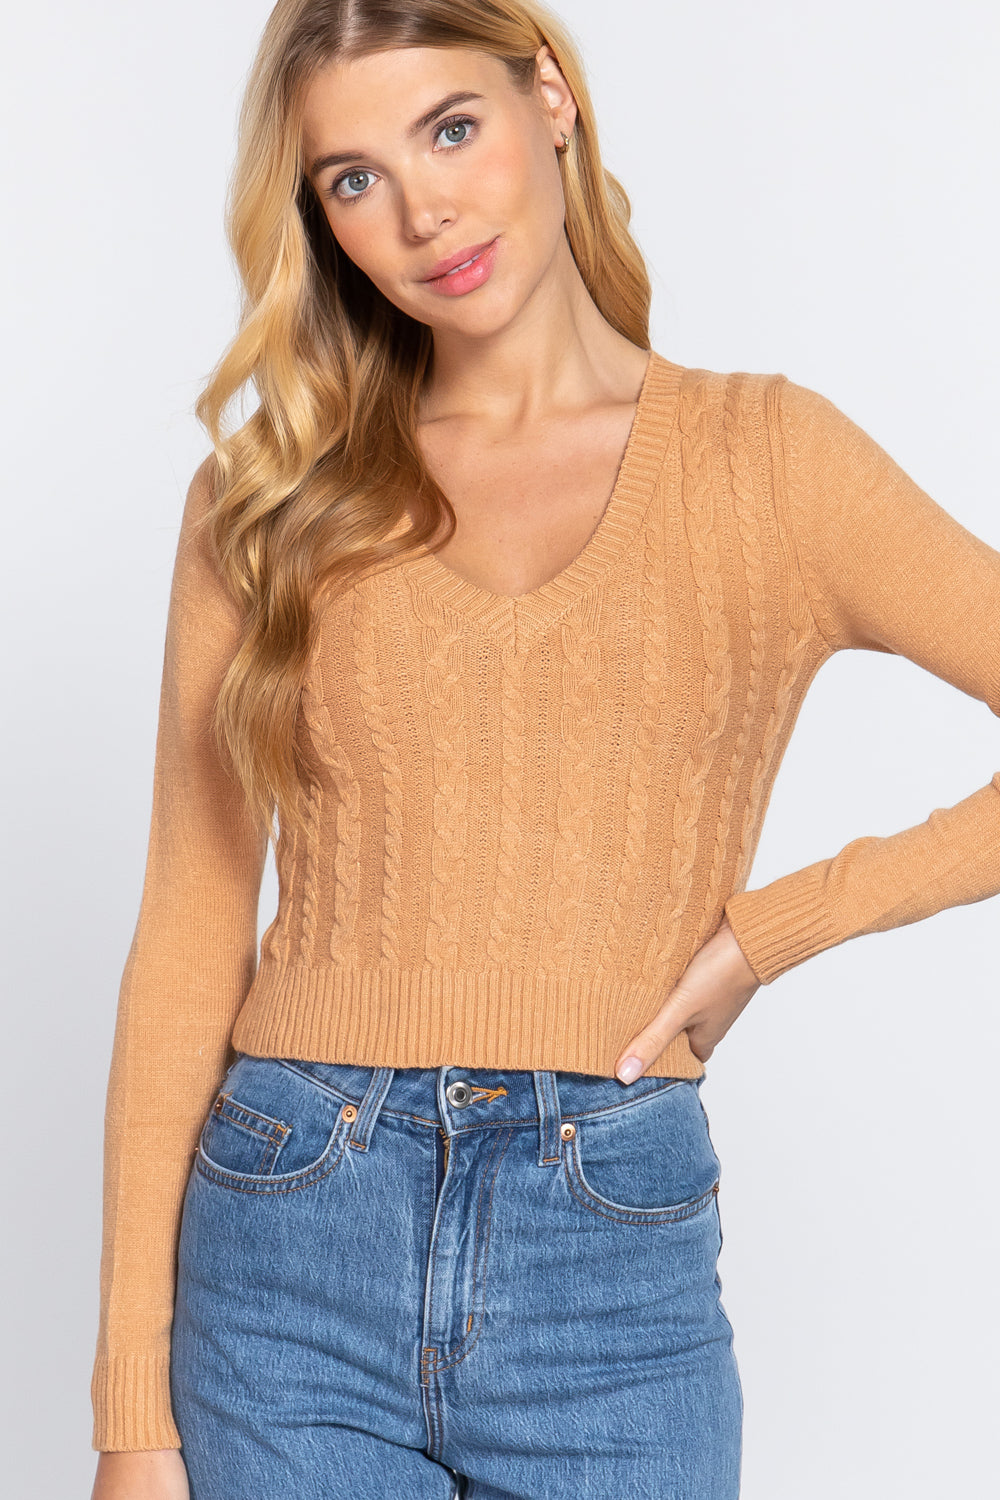 Long Sleeve V-neck Cable Sweater - Tigbuls Variety Fashion